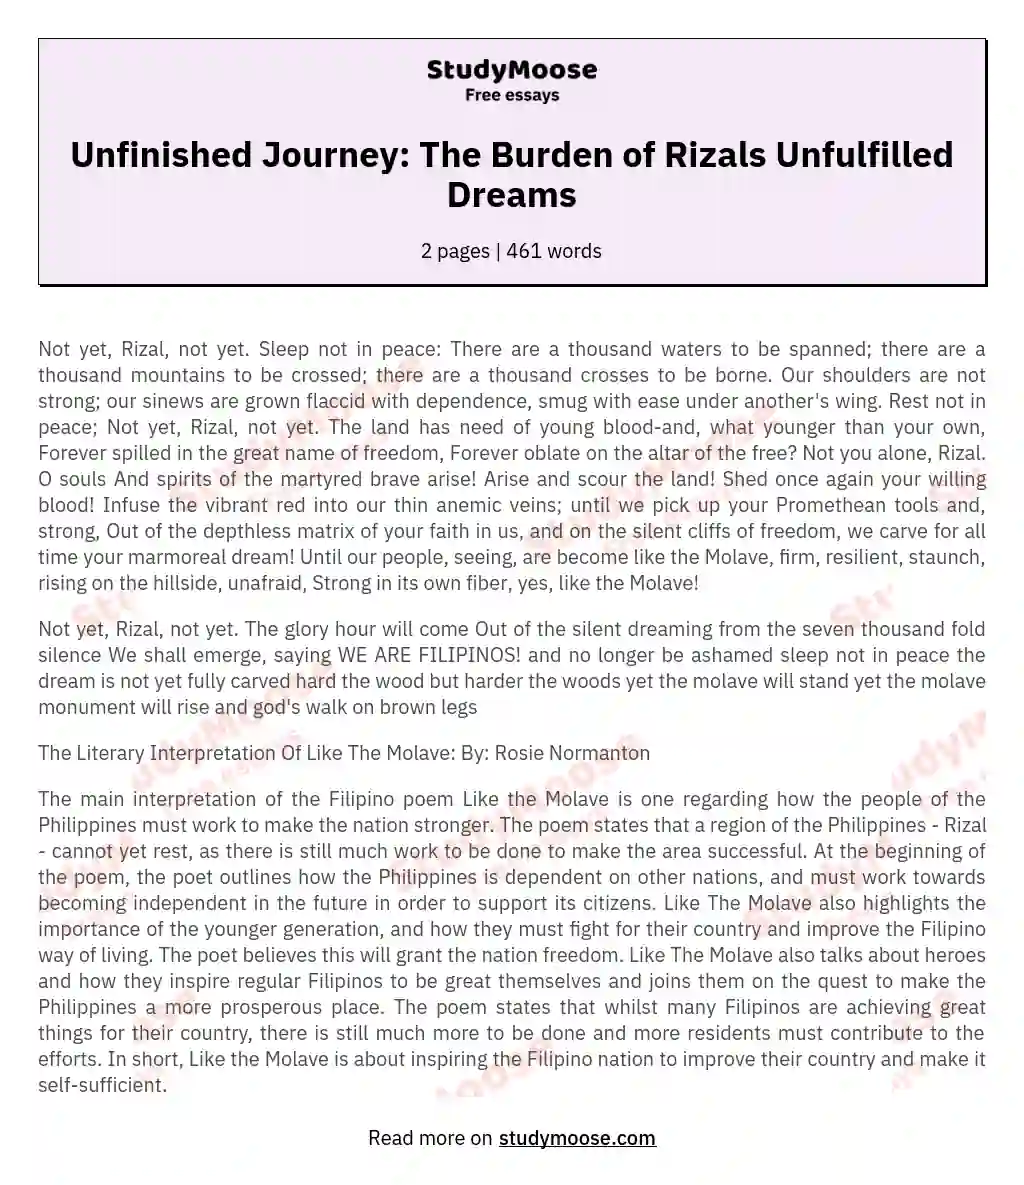 Unfinished Journey: The Burden of Rizals Unfulfilled Dreams essay